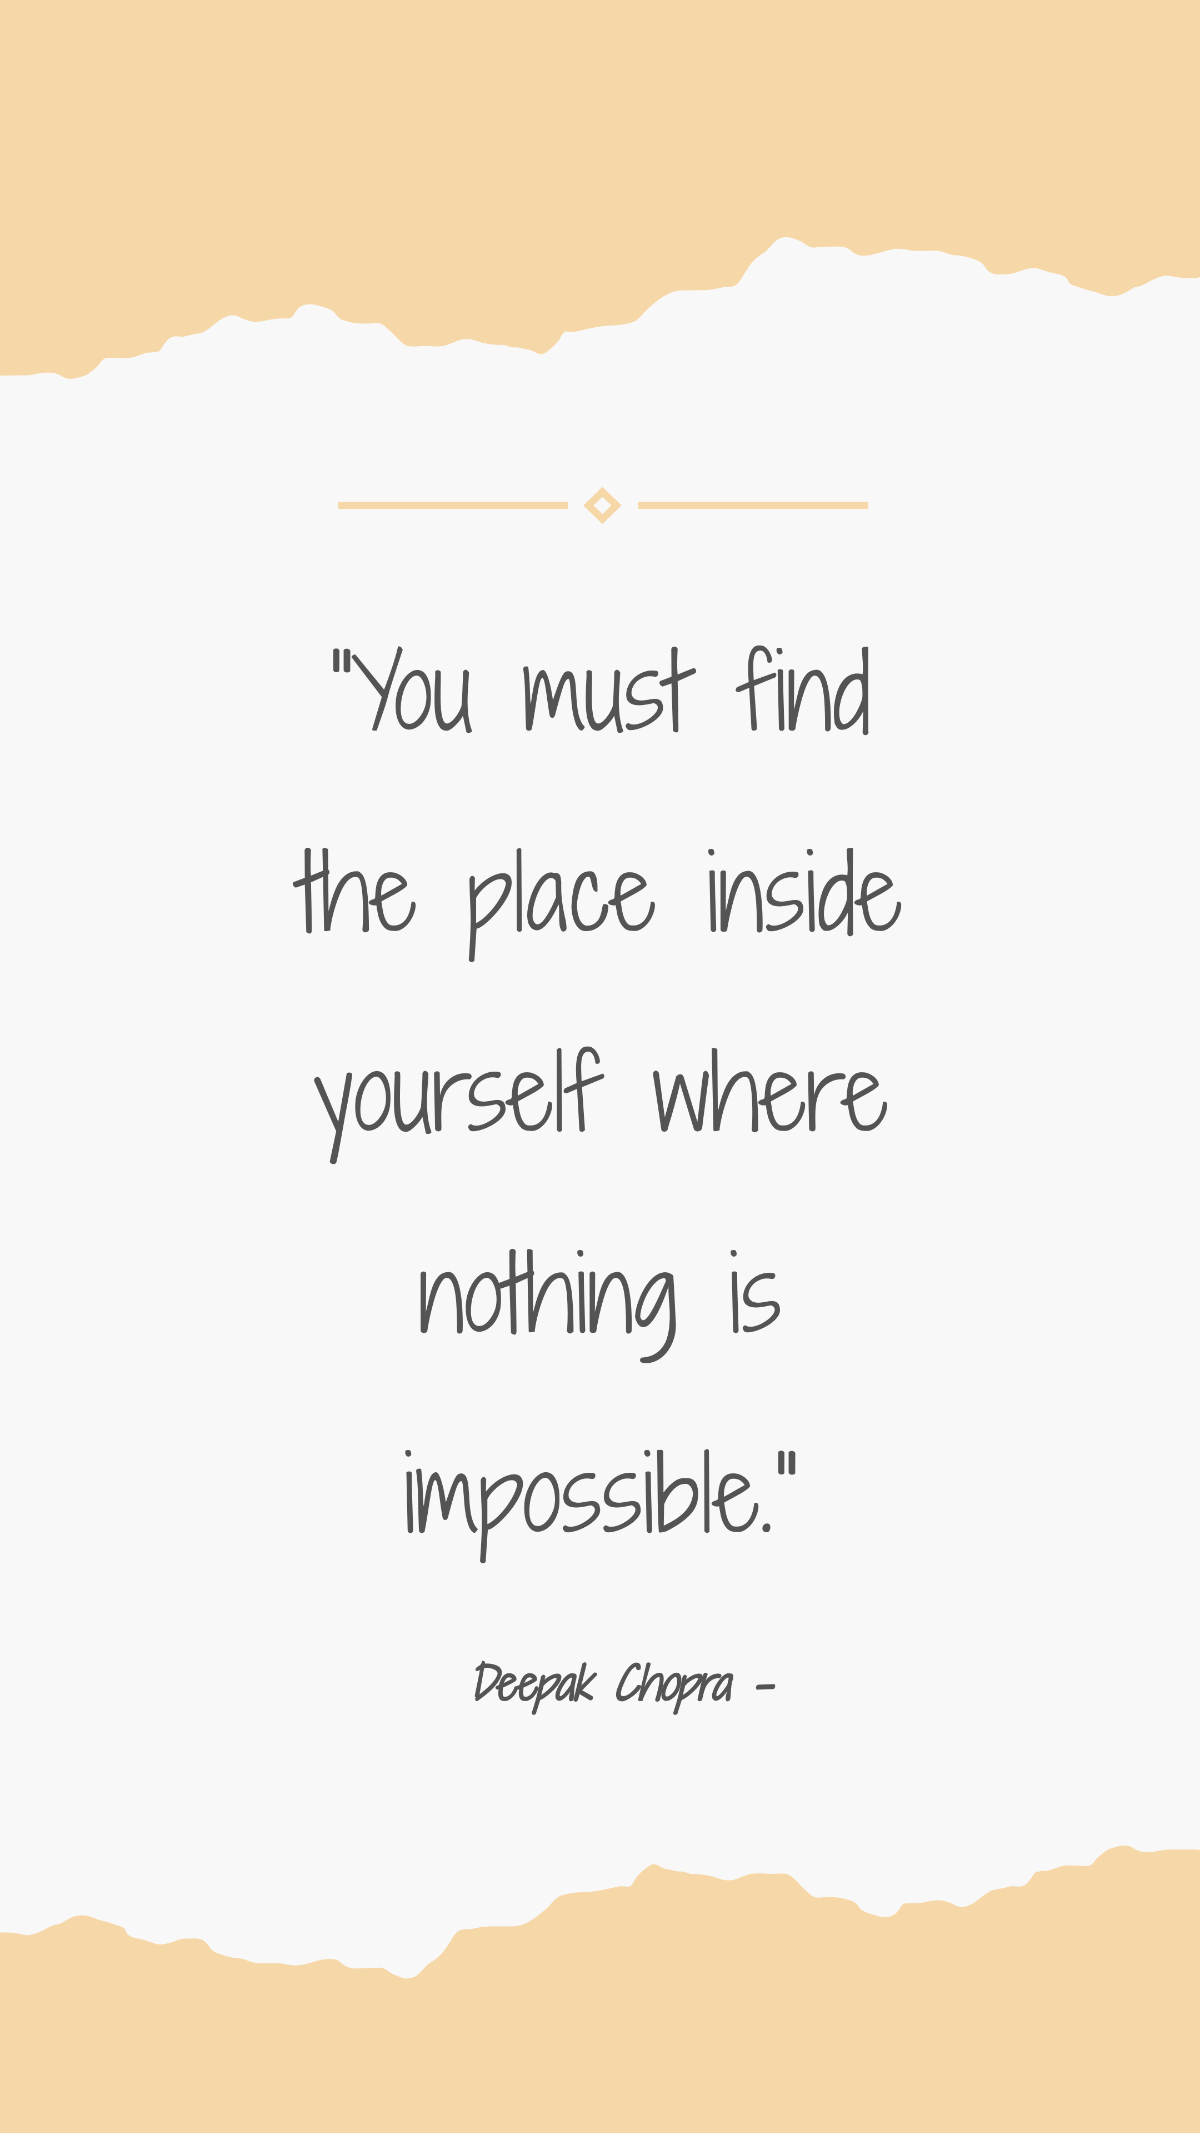 Deepak Chopra - You must find the place inside yourself where nothing is impossible. Template